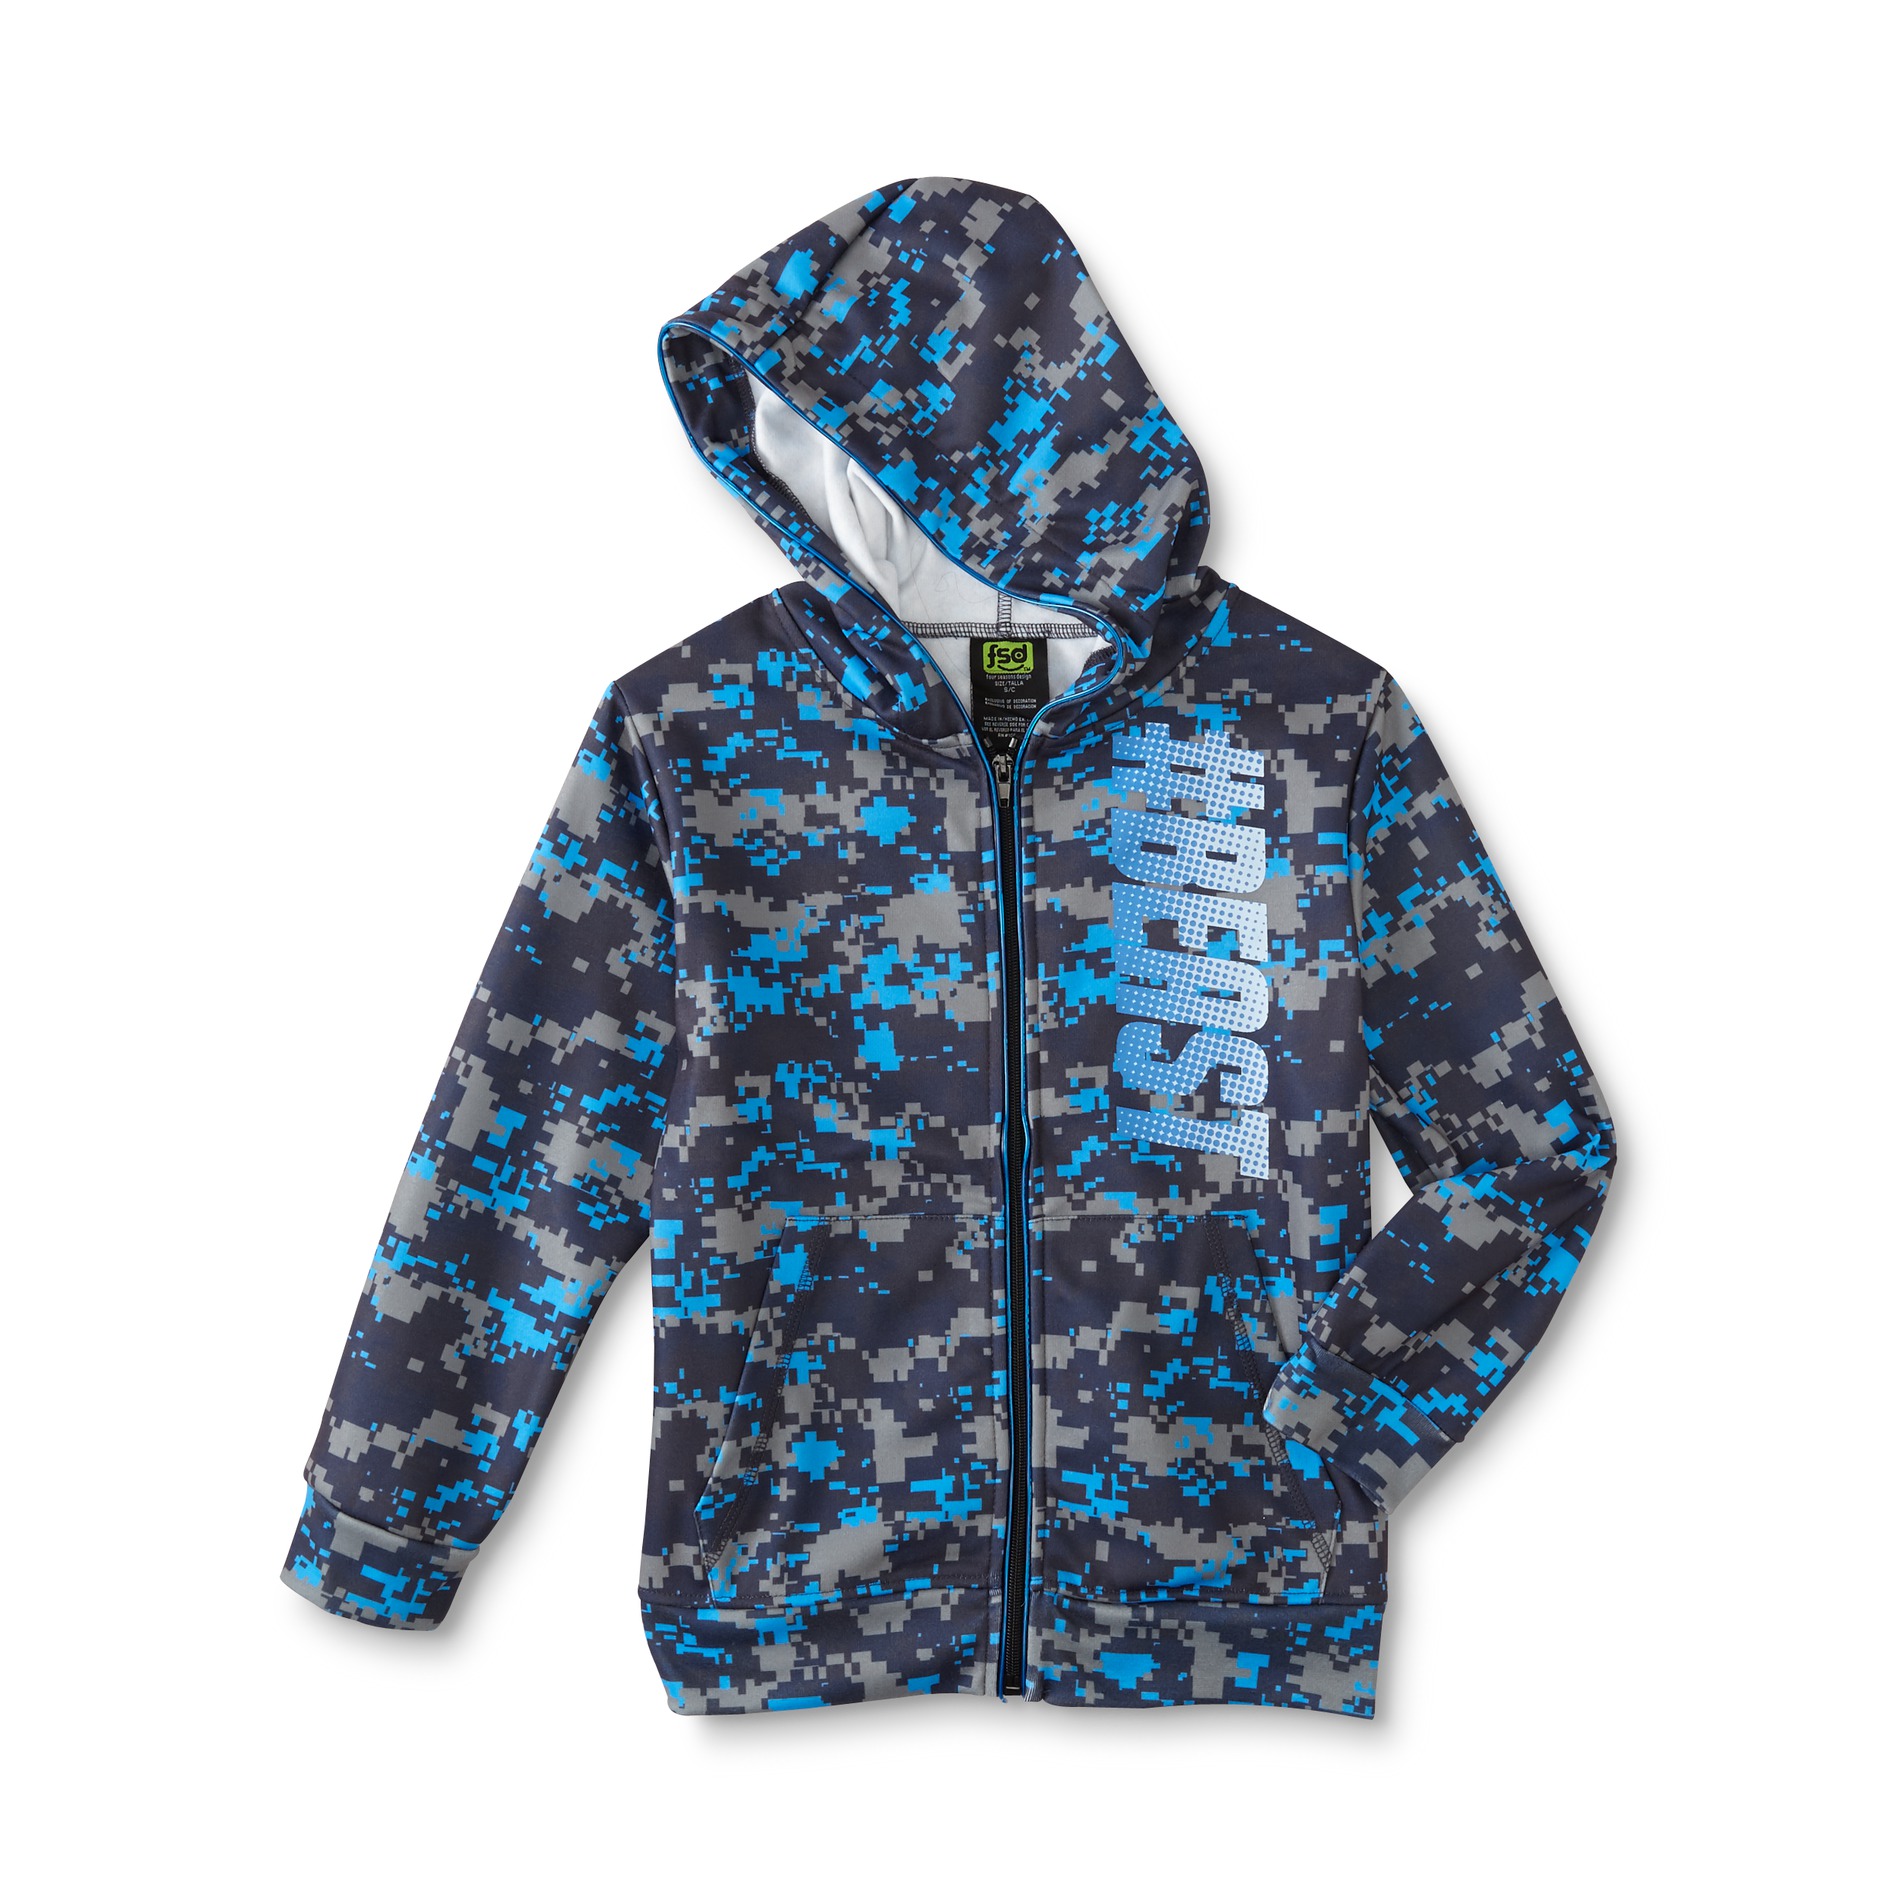 5Star Boys' Light-Up Hoodie Jacket - Camouflage